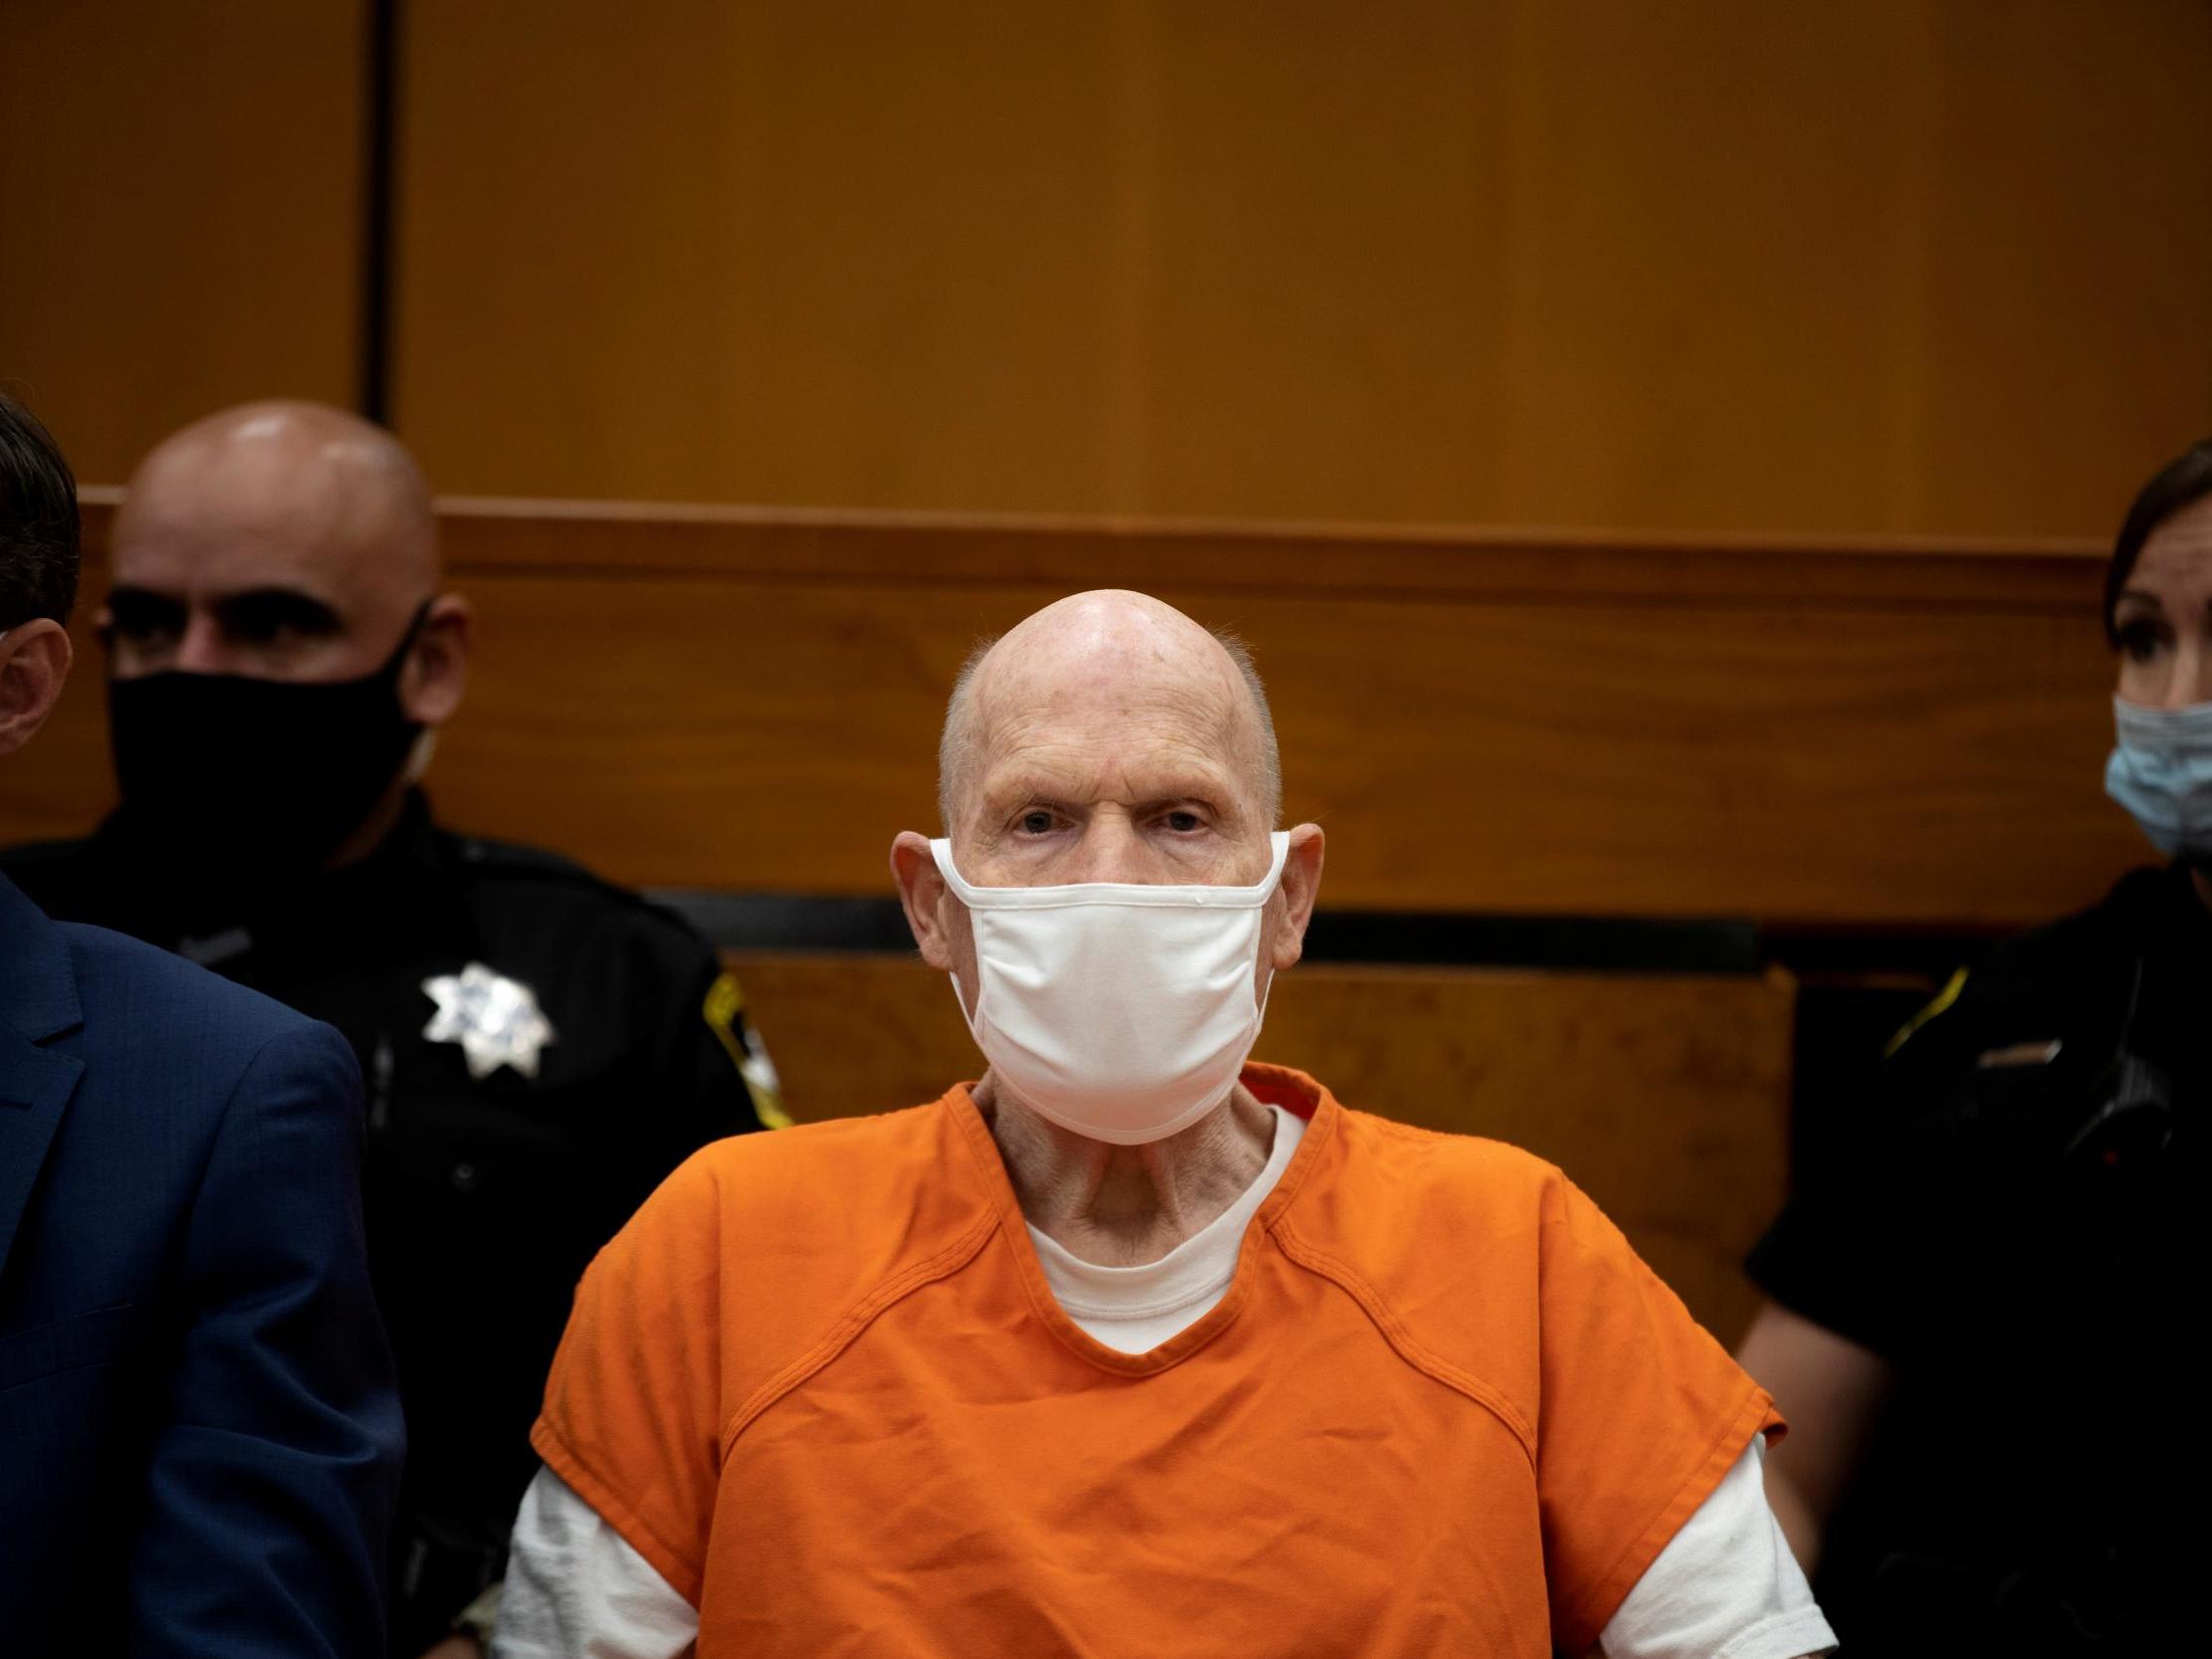 'He truly is an evil monster with no soul': Victims and families face Golden State Killer ahead of sentencing